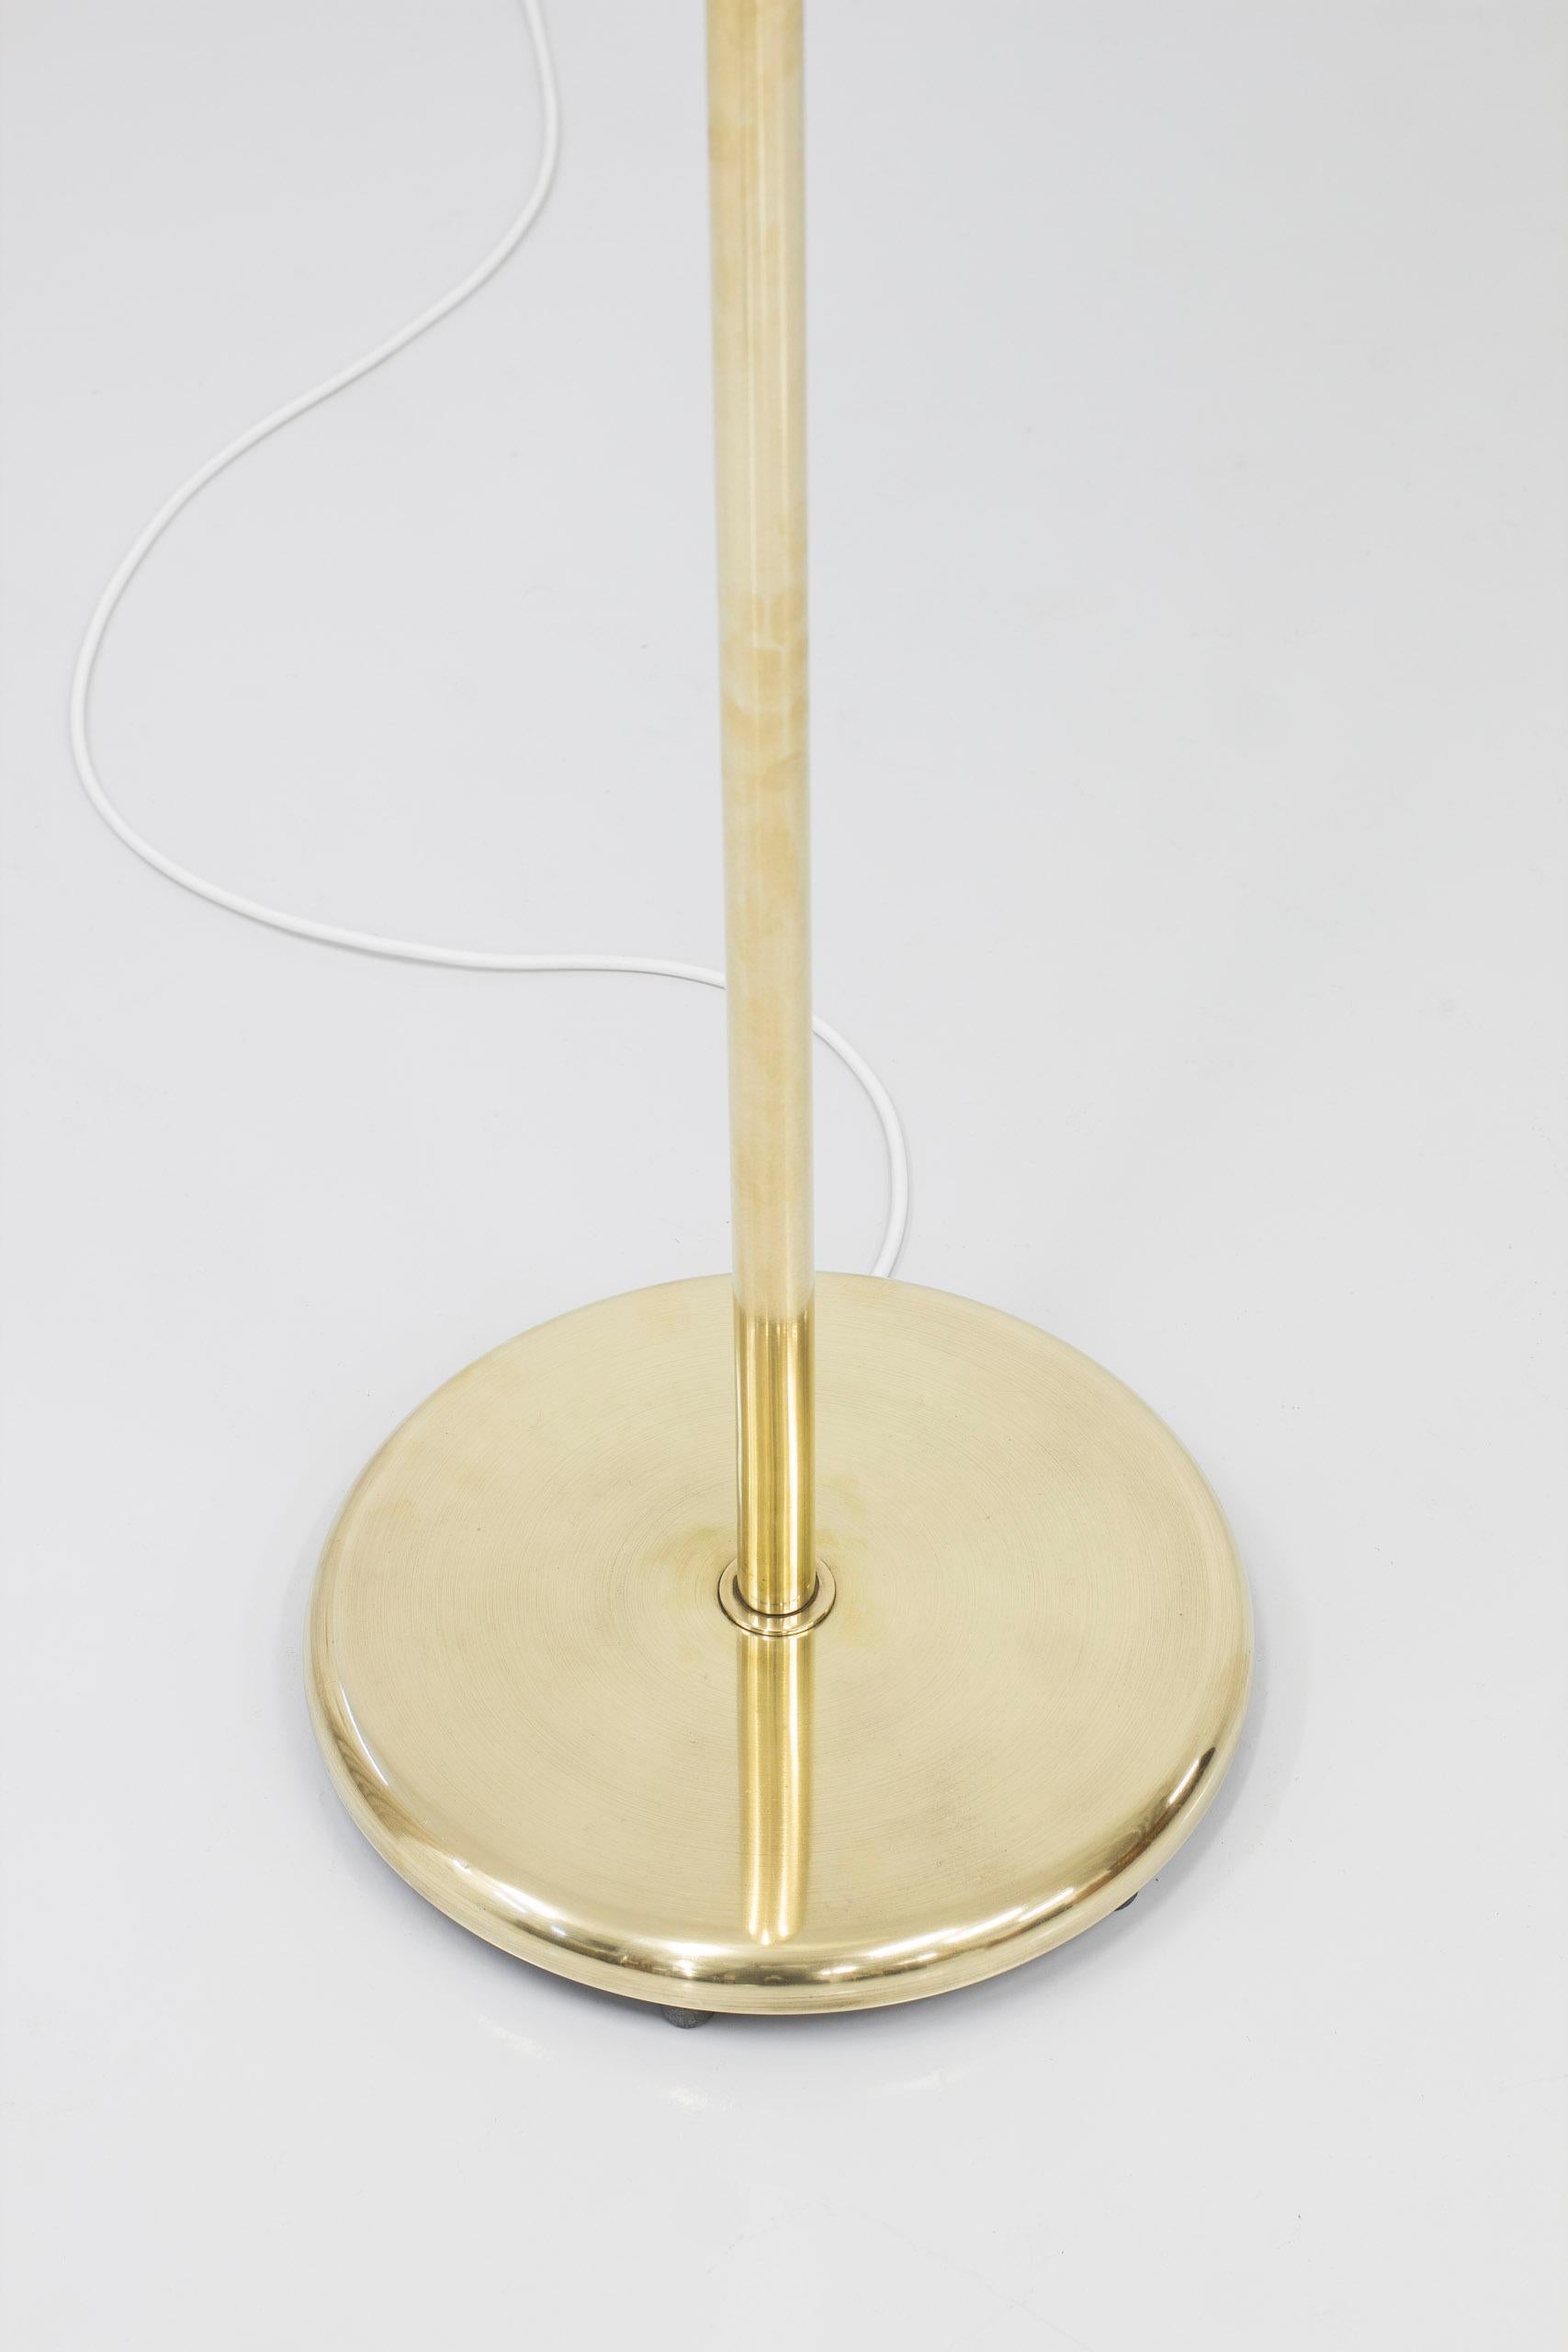 Brass and Glass Floor Lamp 15193 by Harald Notini, Böhlmarks, Sweden For Sale 6